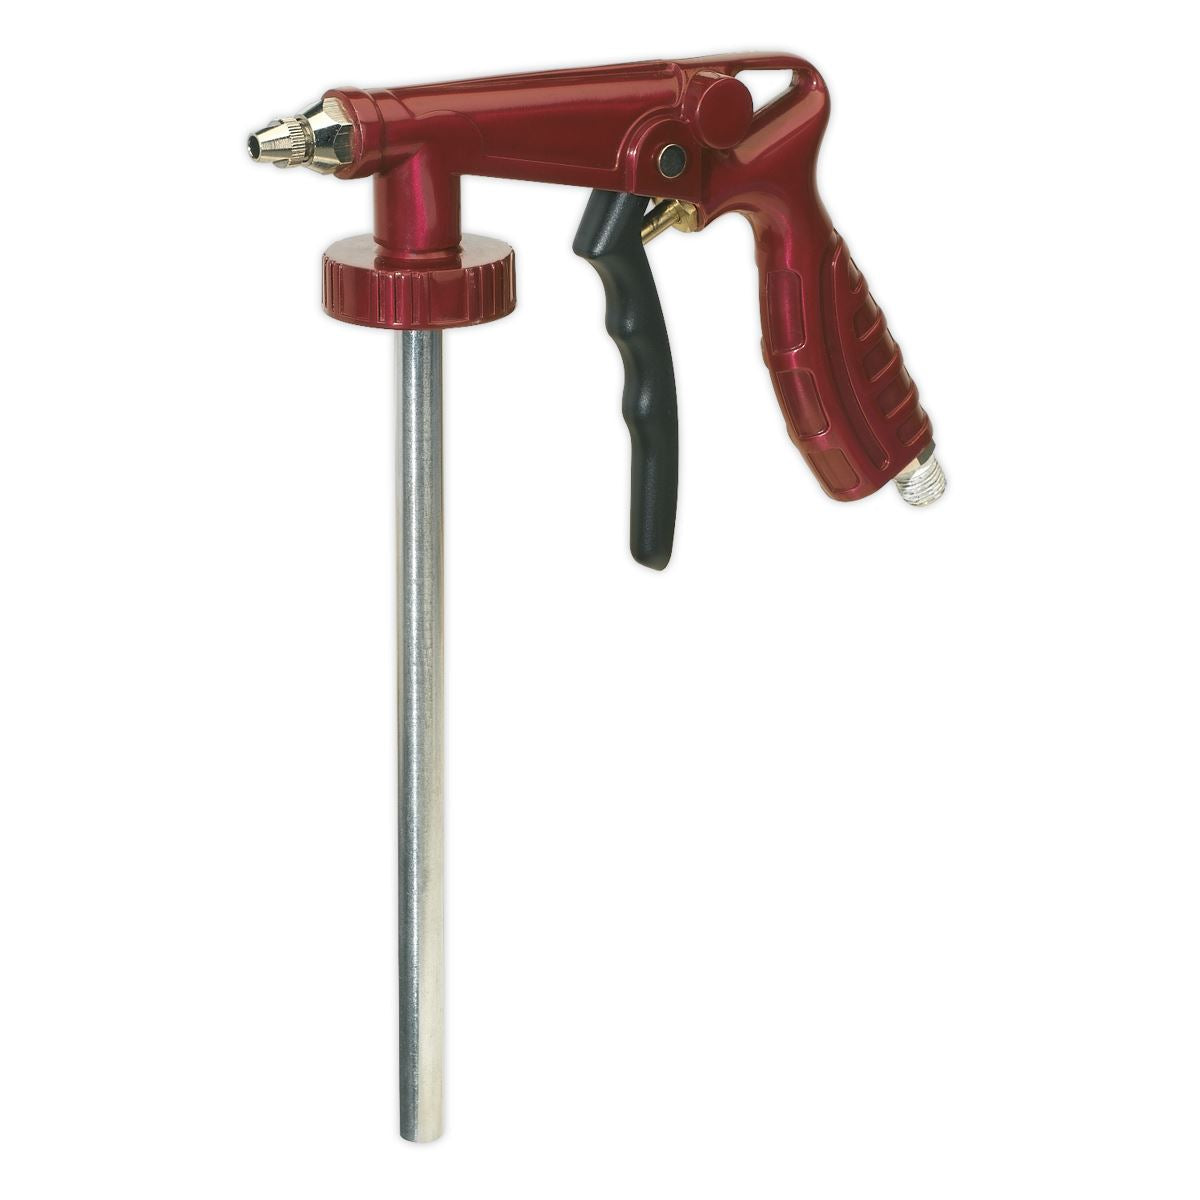 Sealey Air Operated Underbody Coating Gun 1/4" BSP with Flexible Hose